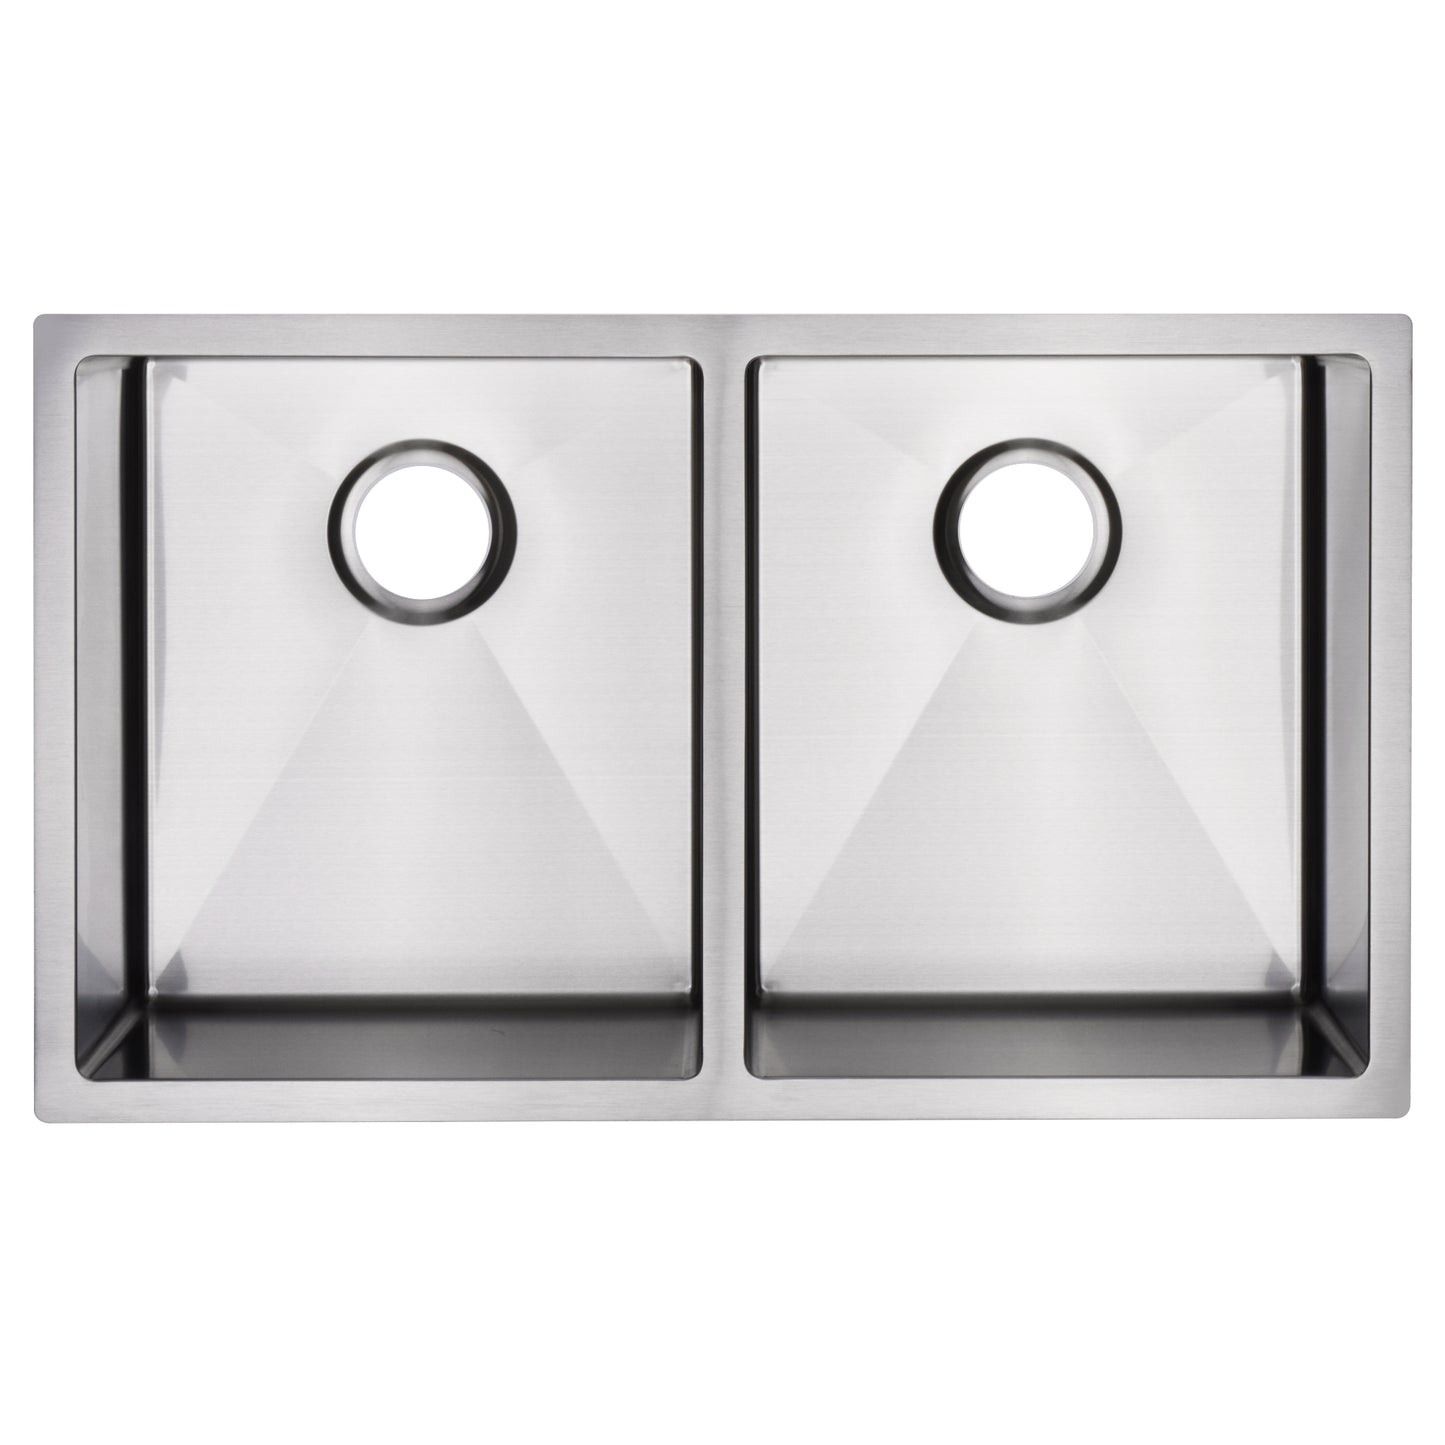 MELA - TRITON 770D Stainless Steel Kitchen/Laundry Sink - Double